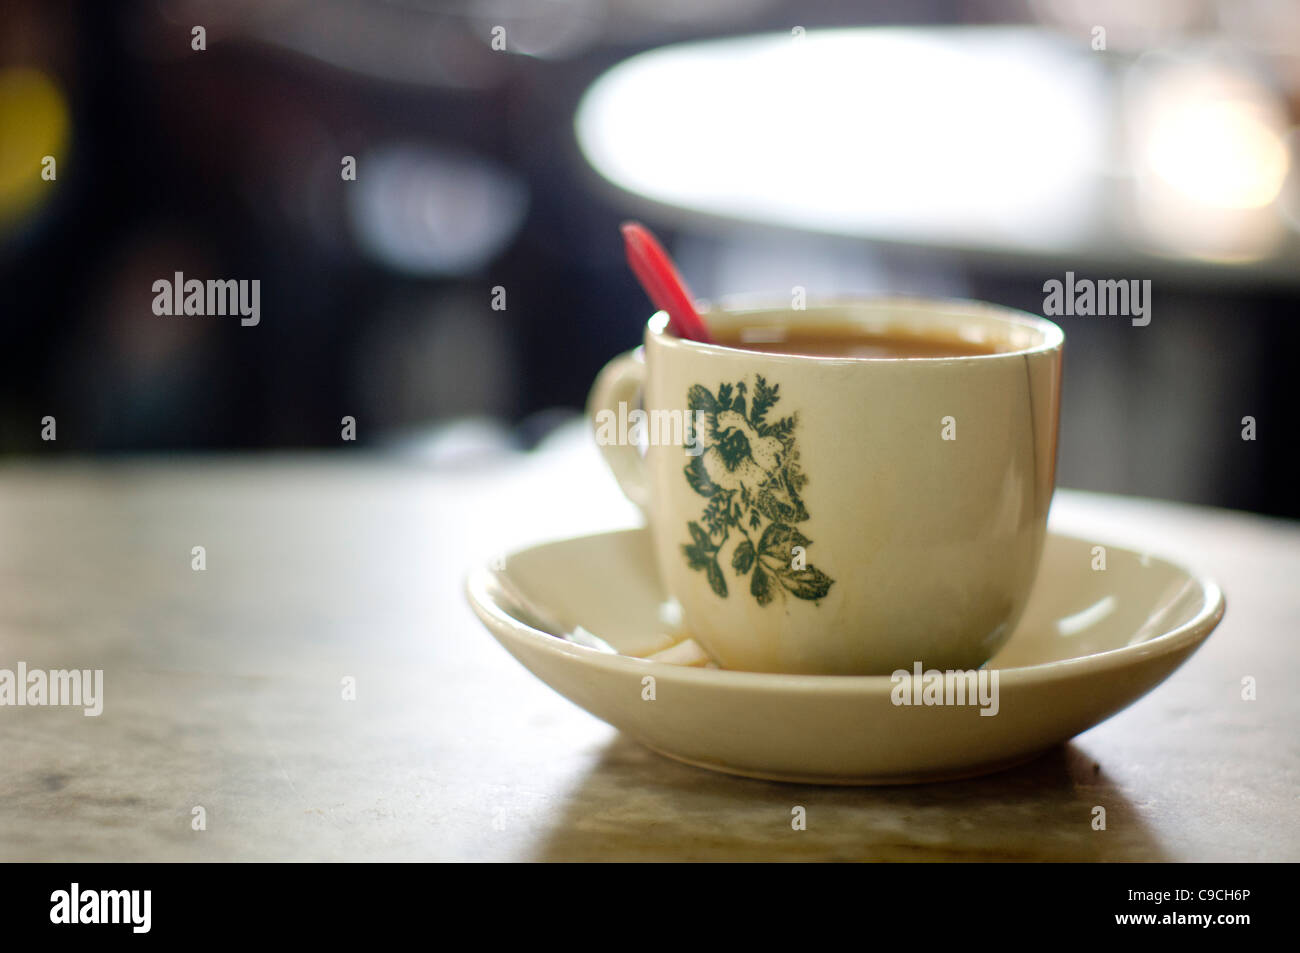 A oversea chinese style coffee that found in Malaysia and Singapore, it is usually served in a cup with printed flowers. Stock Photo